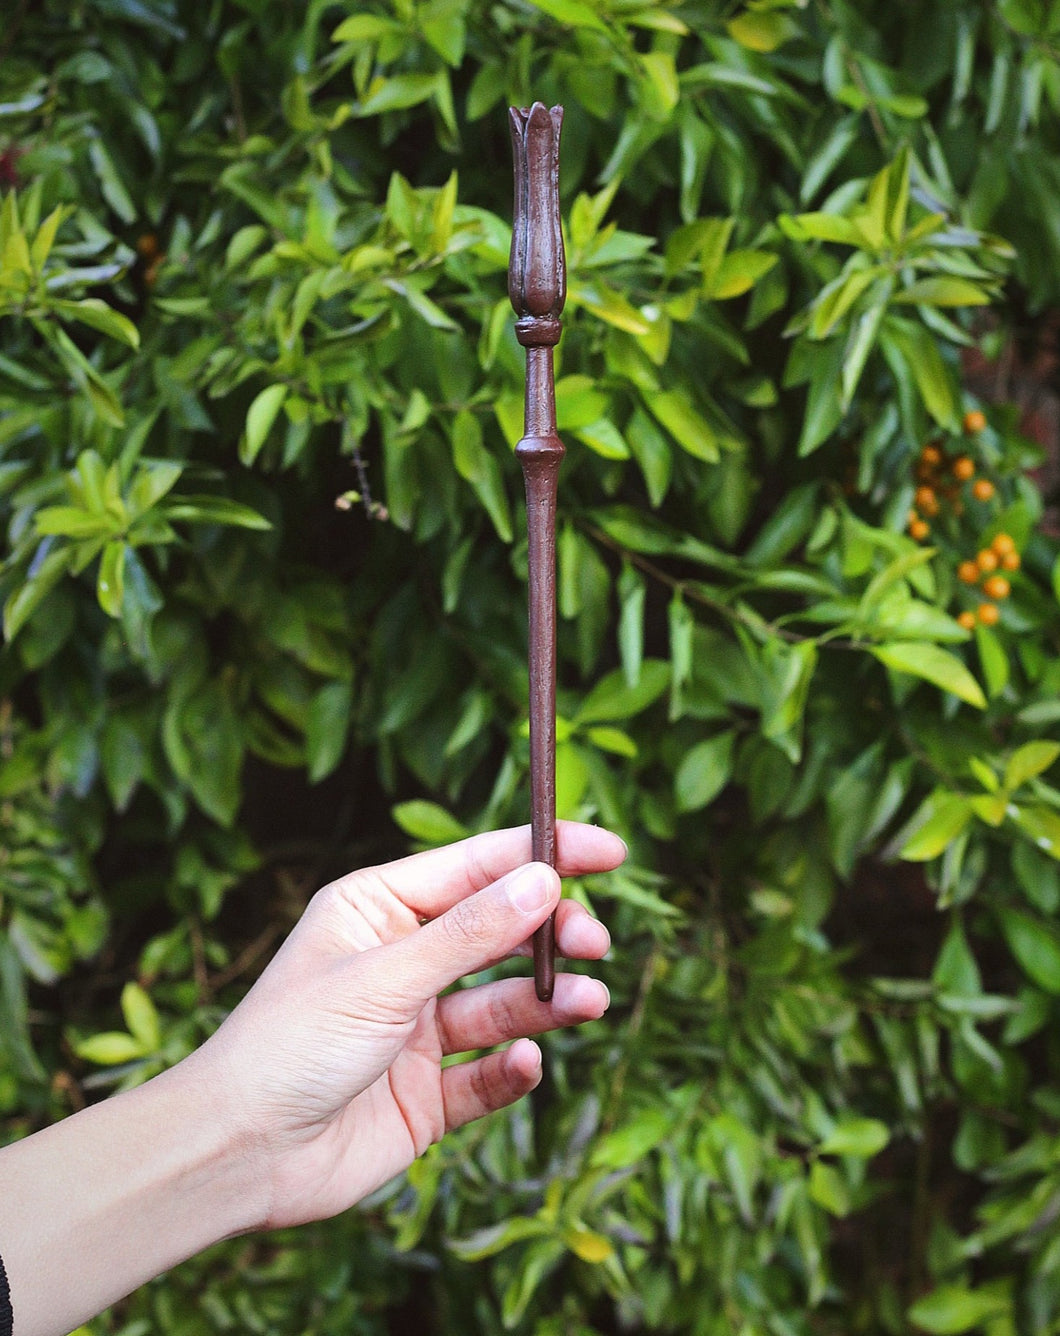 A must have for any Harry Potter fan. These incredible wands were hand created as an exclusive item for The Raven’s Claw by the talented artist Jaded Dragon Creations. Each wand is sculpted, hand cast and individually painted and takes multiple days to make a single wand. Wands measure at roughly 25.5cm and are made from a flexible material to aid in durability. As they are all made by hand, some slight differences may appear between wands. Wand care: do not bend and avoid contact with moisture.